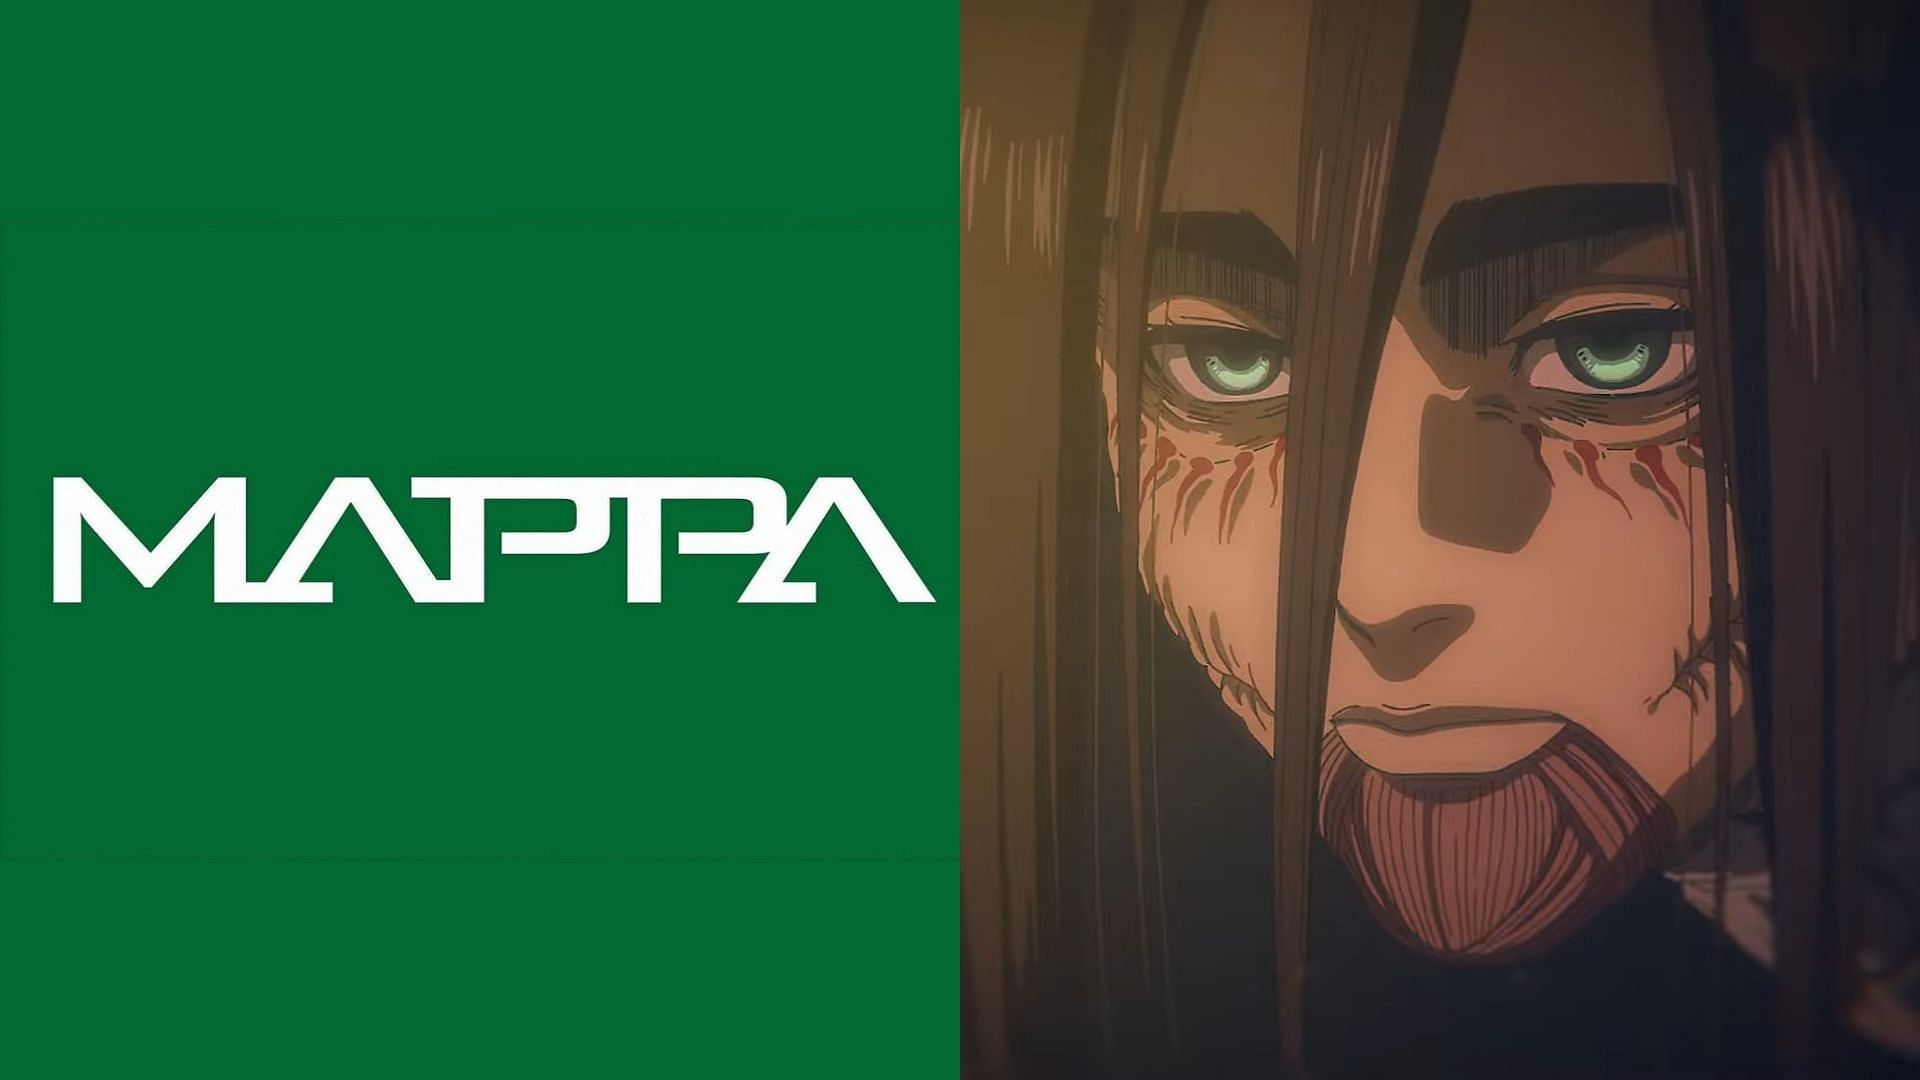 Attack on Titan creator Isayama apologizes to MAPPA for the final chapter